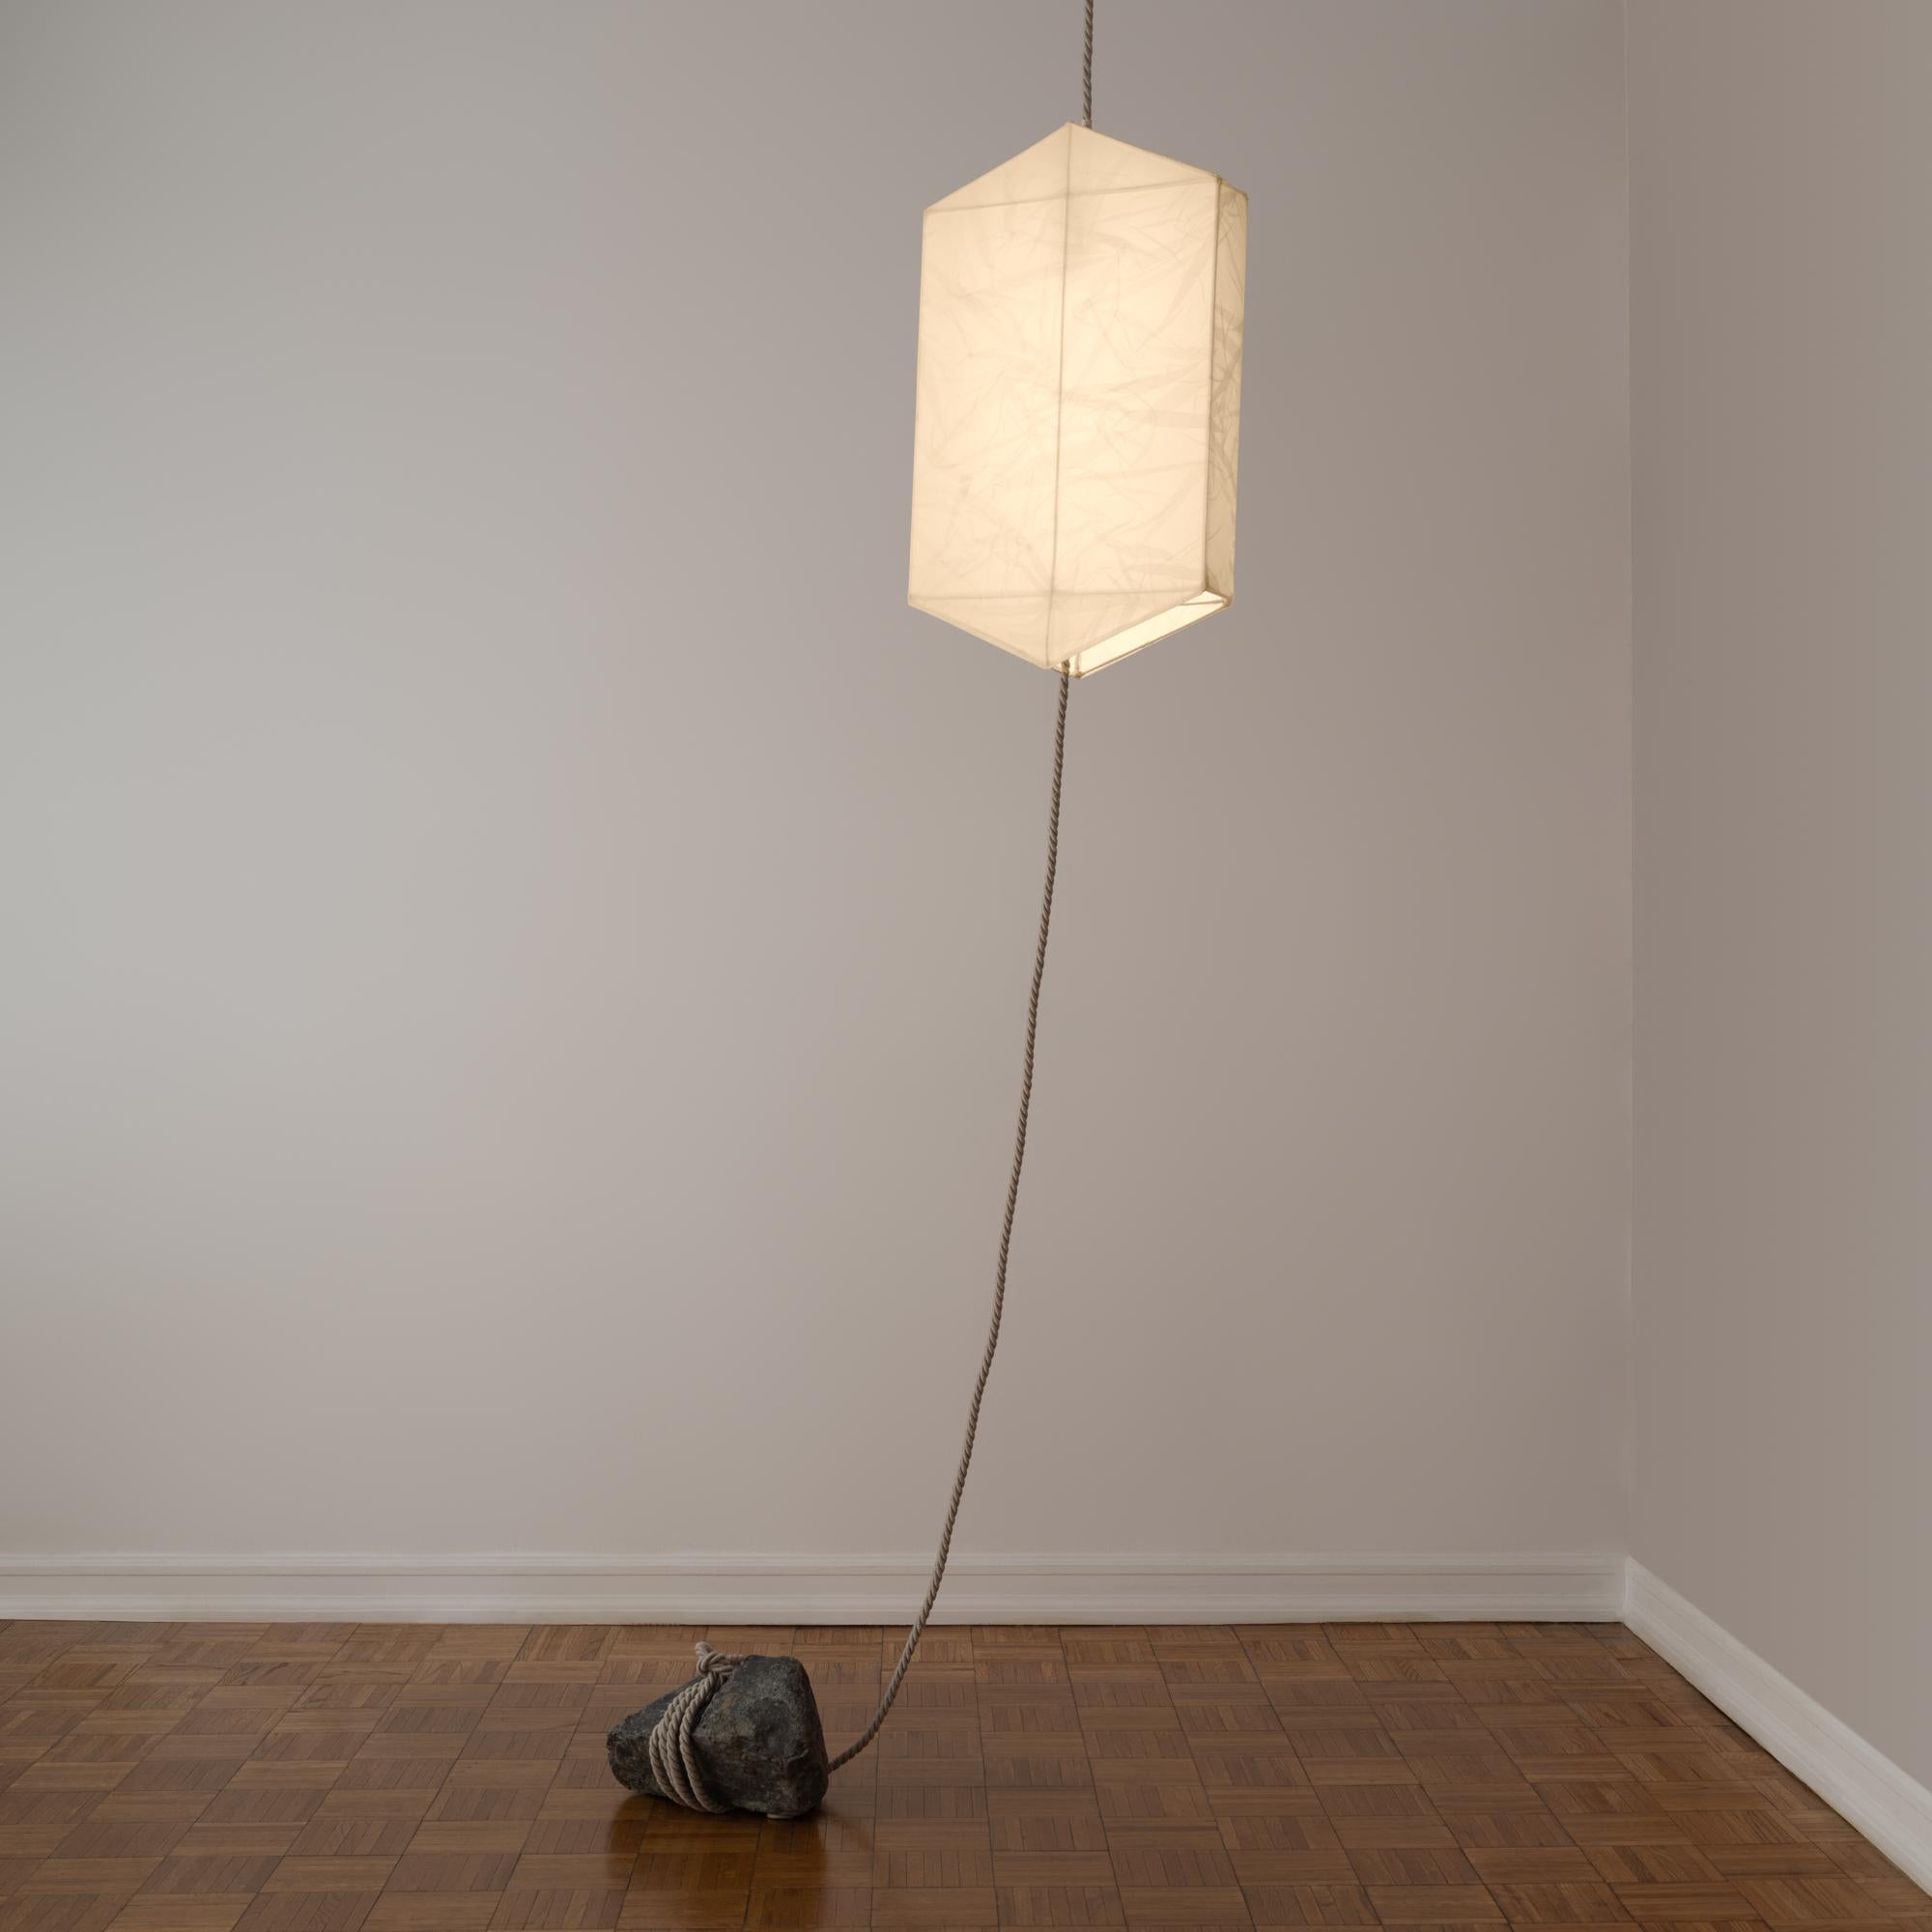 One-of-a-kind, lantern-like hanging lamp composed of silk organza stretched over a hexagonal steel wire frame, affixed to the ceiling with a rope and anchored to the ground by a stone. Designed by Rafael Prieto in tandem with artist and designer